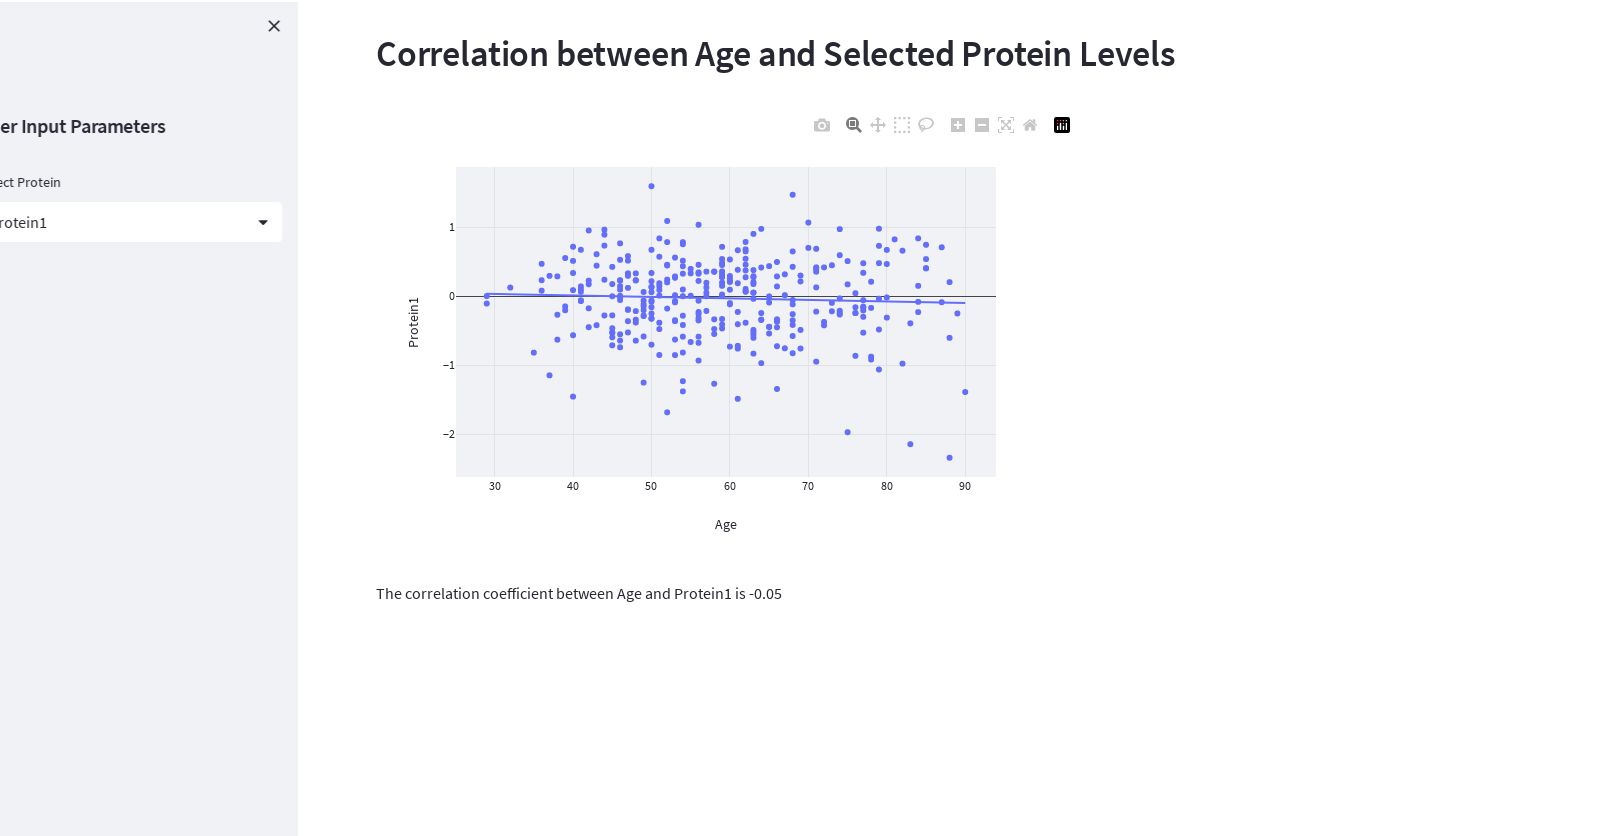 Breast Cancer and Protein Correlation with Age using https://www.kaggle.com/datasets/amandam1/breastcancerdataset